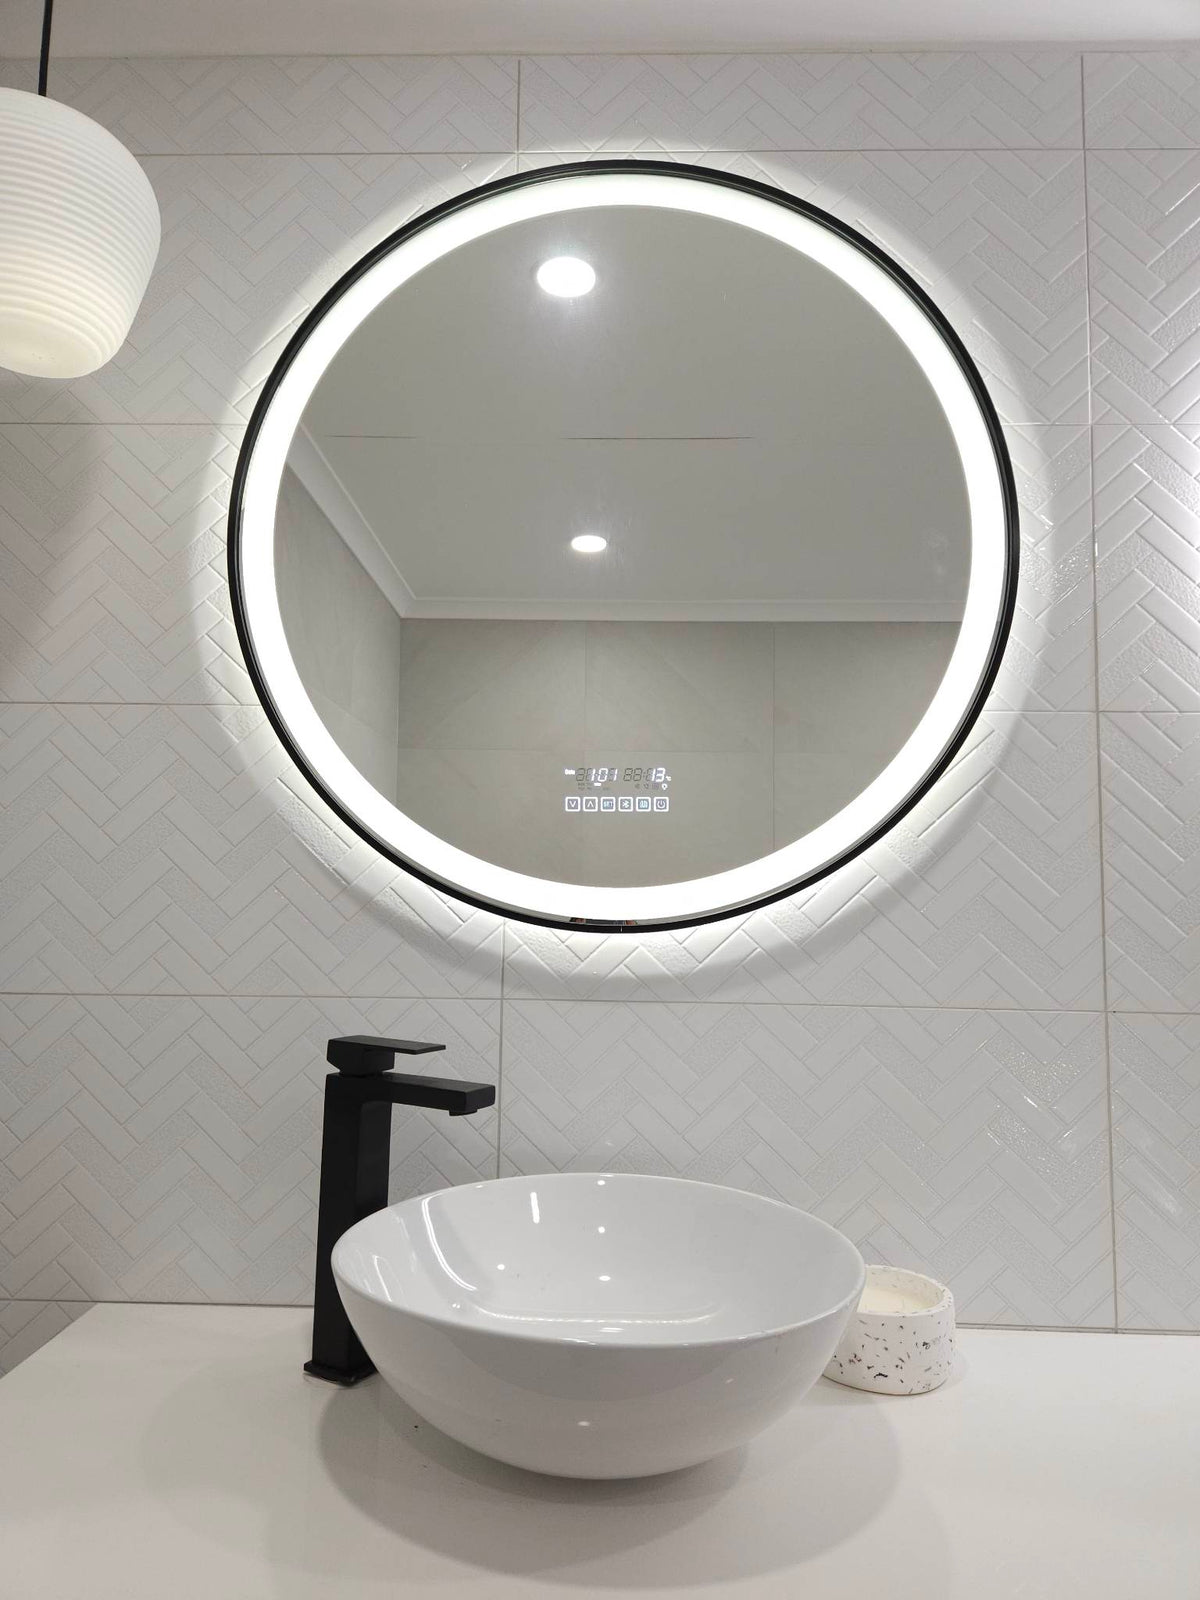 Lighted Black-Framed Circle-Shaped InVogue Smart LED Mirror in White-Themed Powder Room.